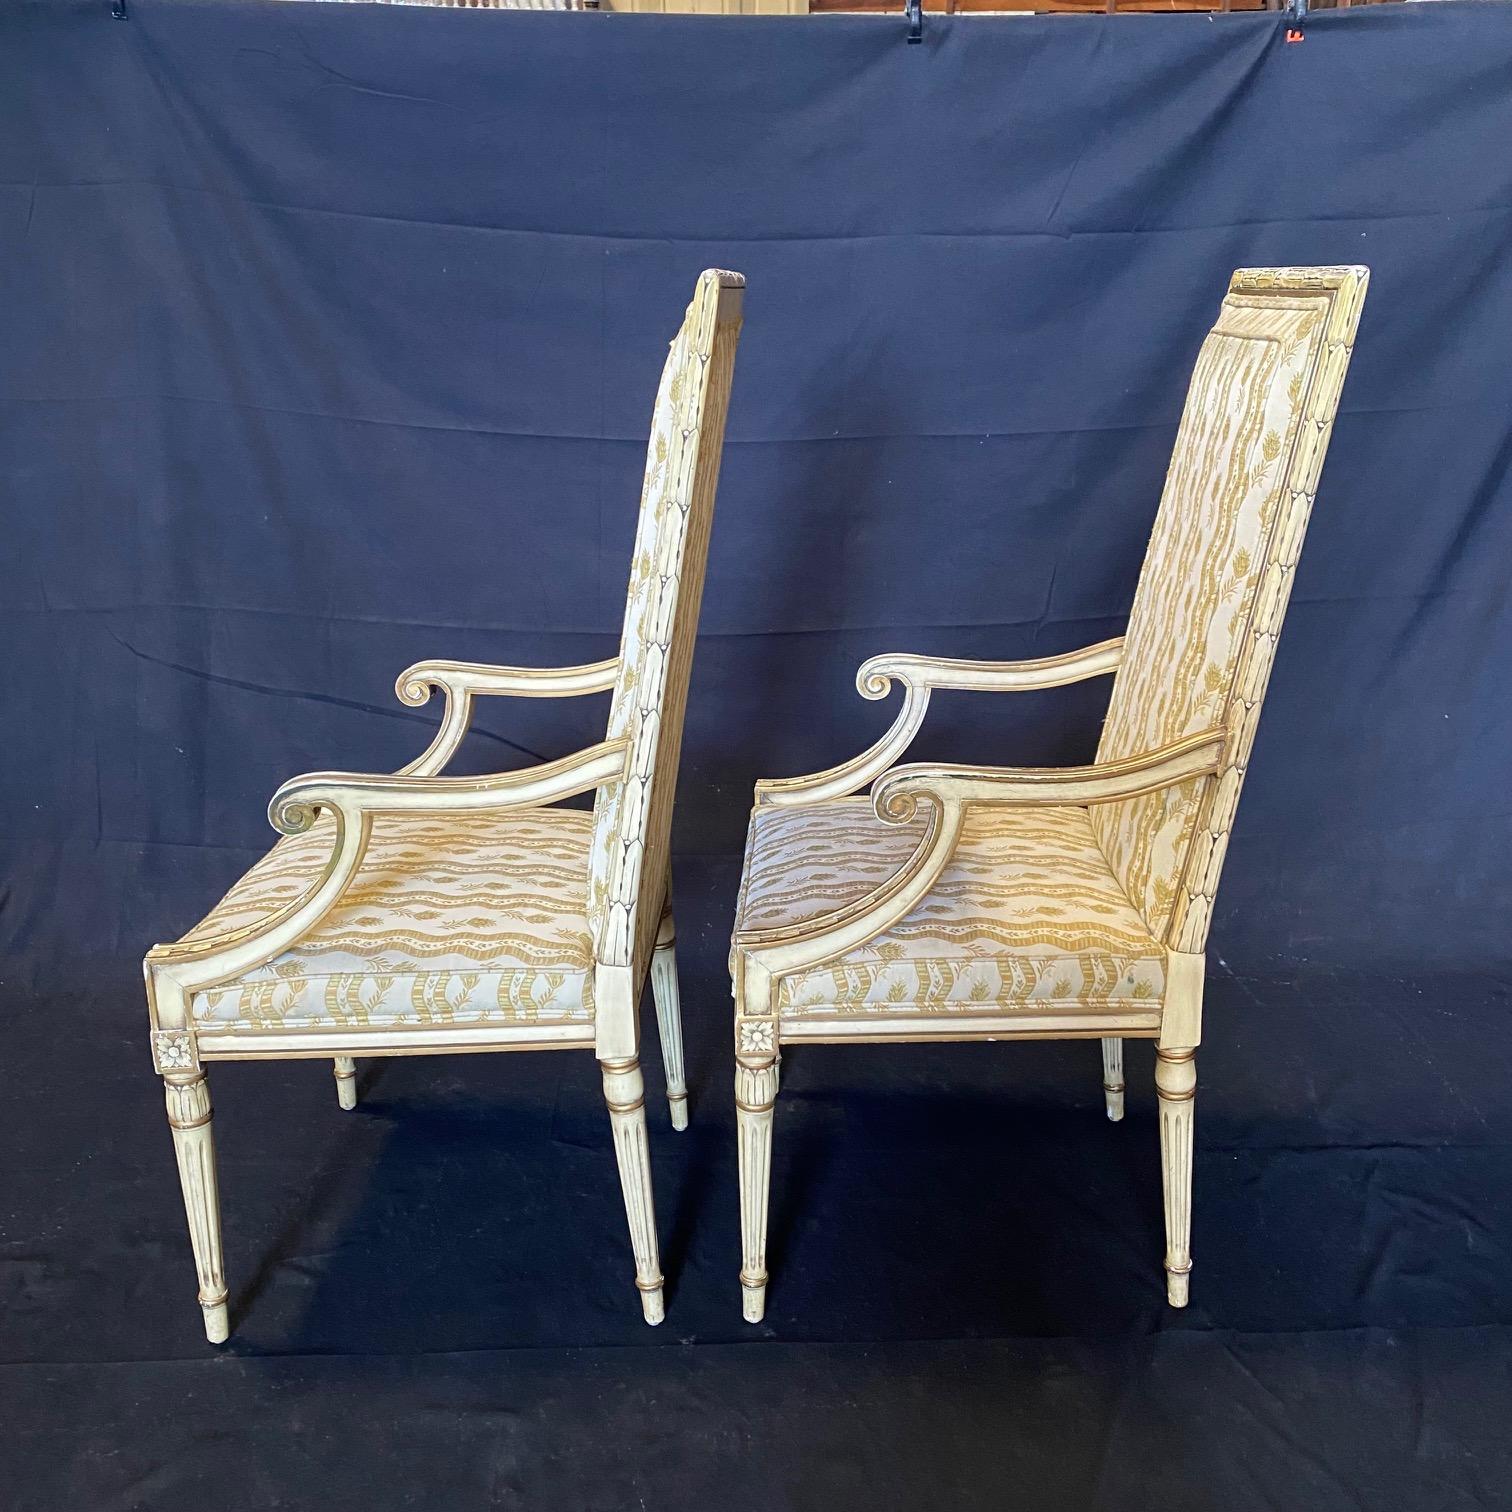 Upholstery Pair of Signed French Neoclassical Style Designer Quality Armchairs